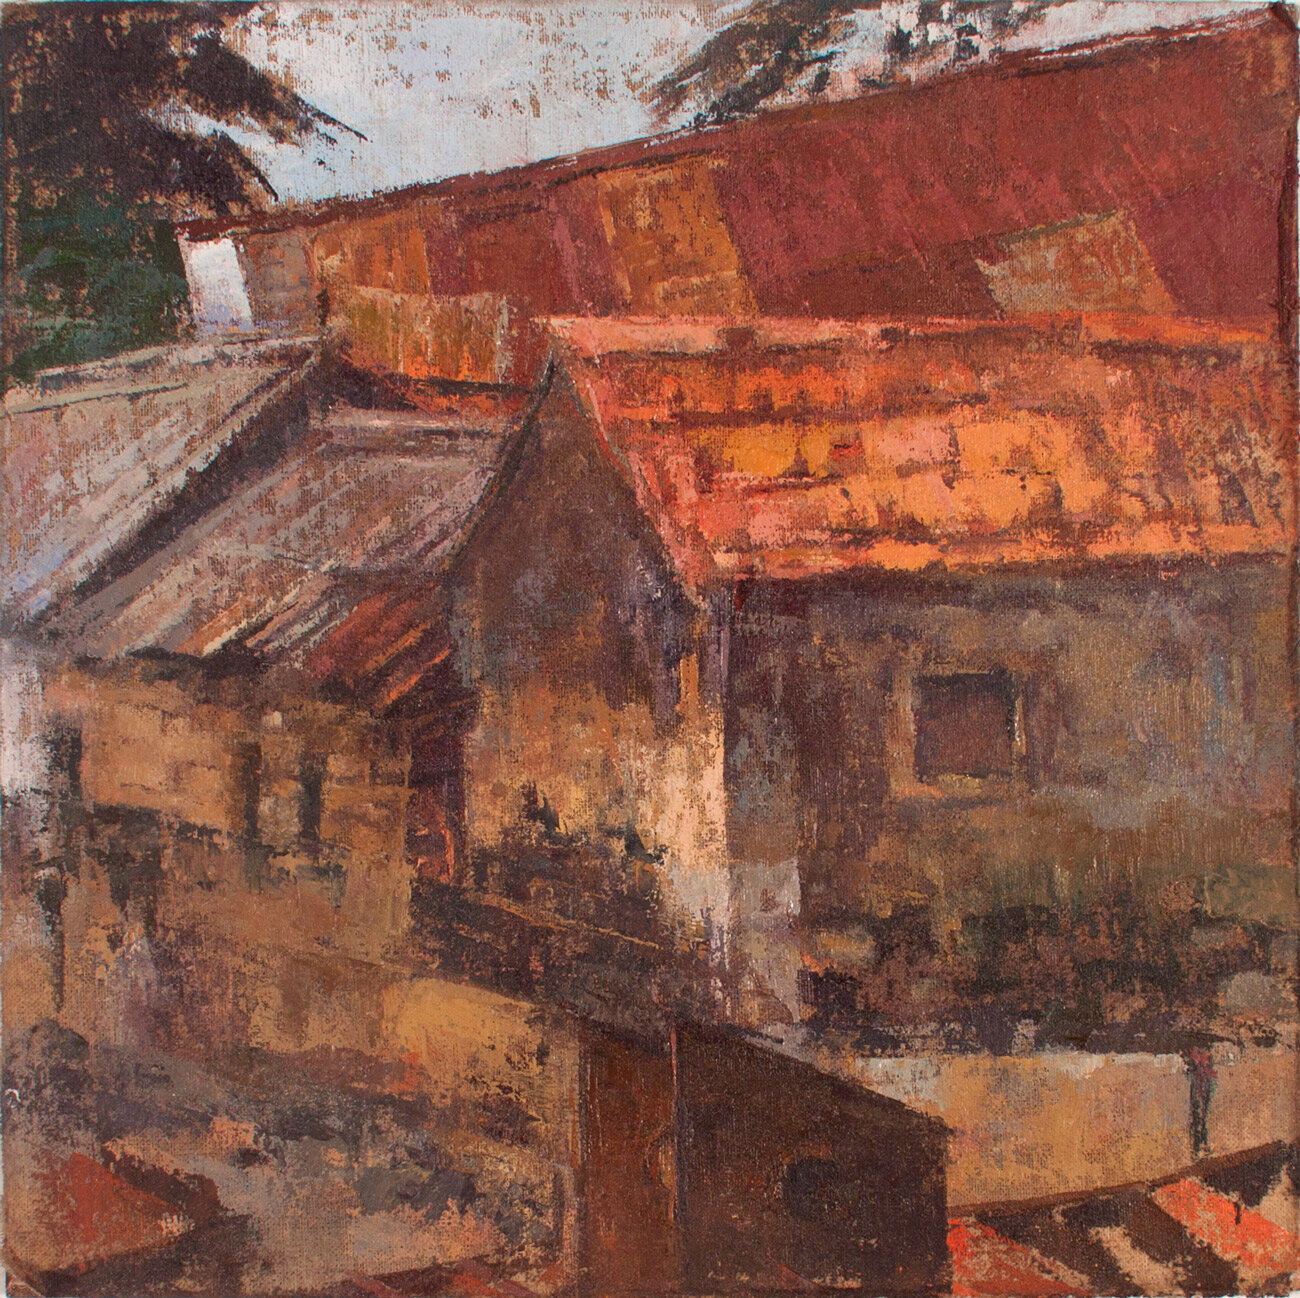  Kito's House from Sidewalk oil on muslin on panel 8 x 8 in 